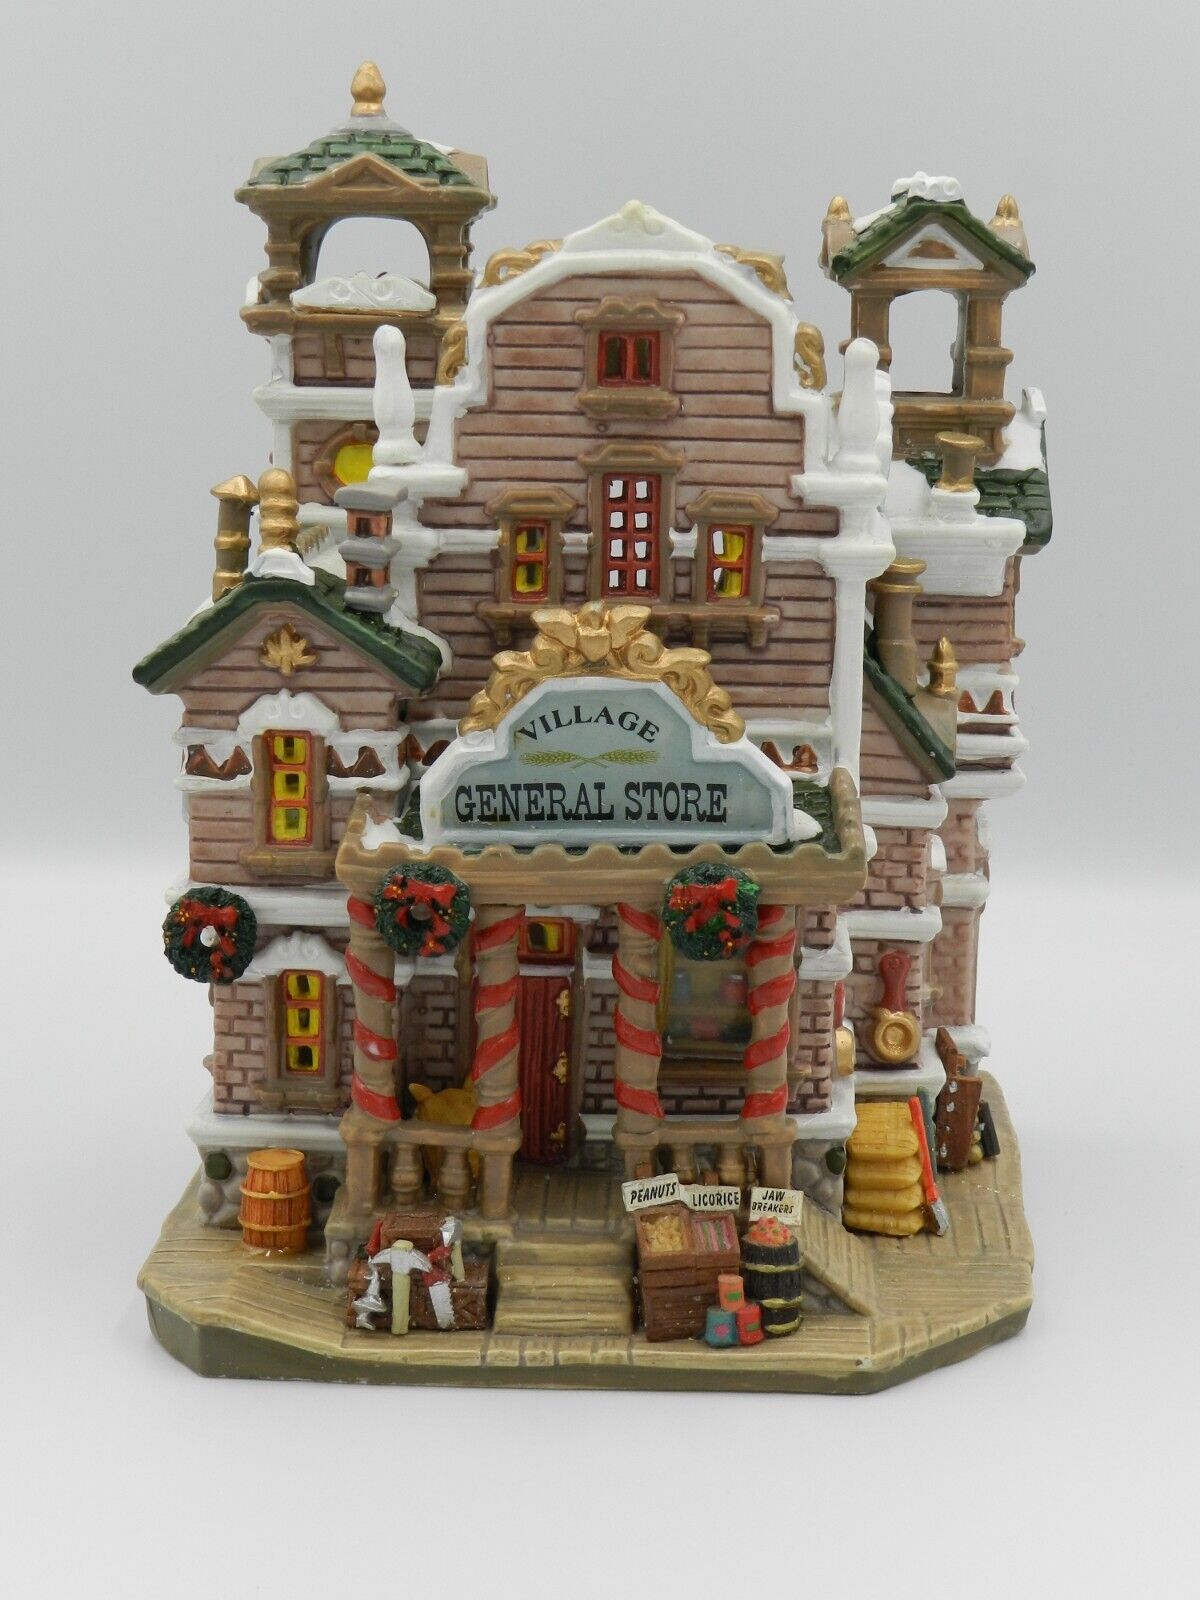 Lemax 2004 Village General Store #45061 Christmas Village Collection